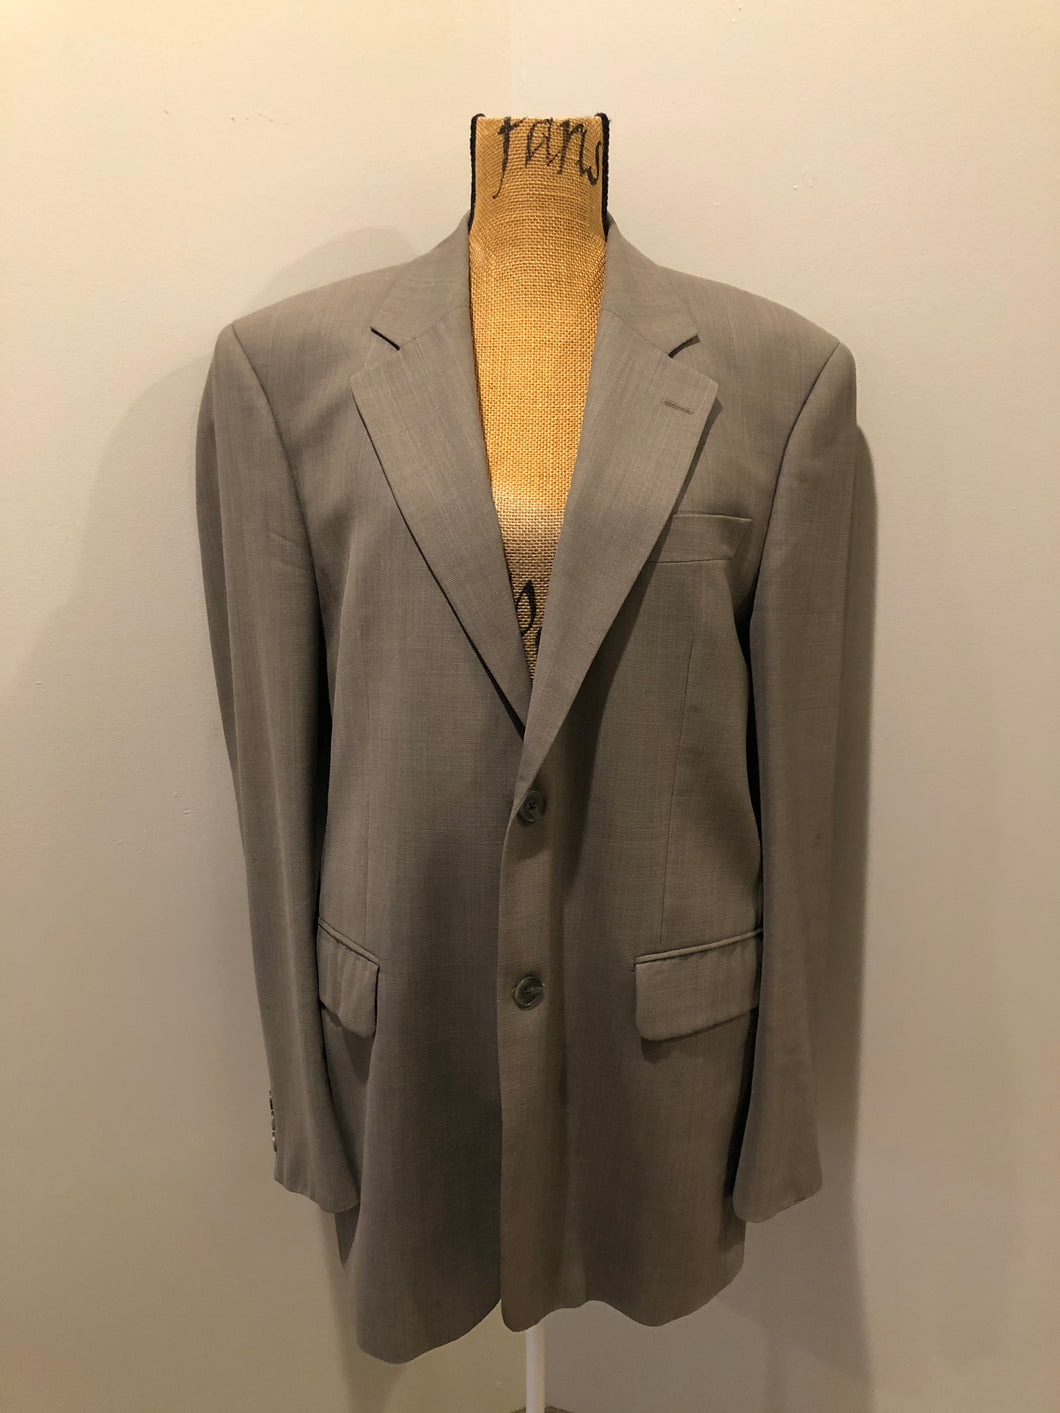 Kingspier Vintage - WM.H. Leishman (sold at Tip Top Tailors) two piece medium grey 100% pure virgin wool suit.The jacket is a single breasted, two button notch lapel with two flap pockets and two inside pockets. Pants are pleated with welt pockets. Made in Canada. 